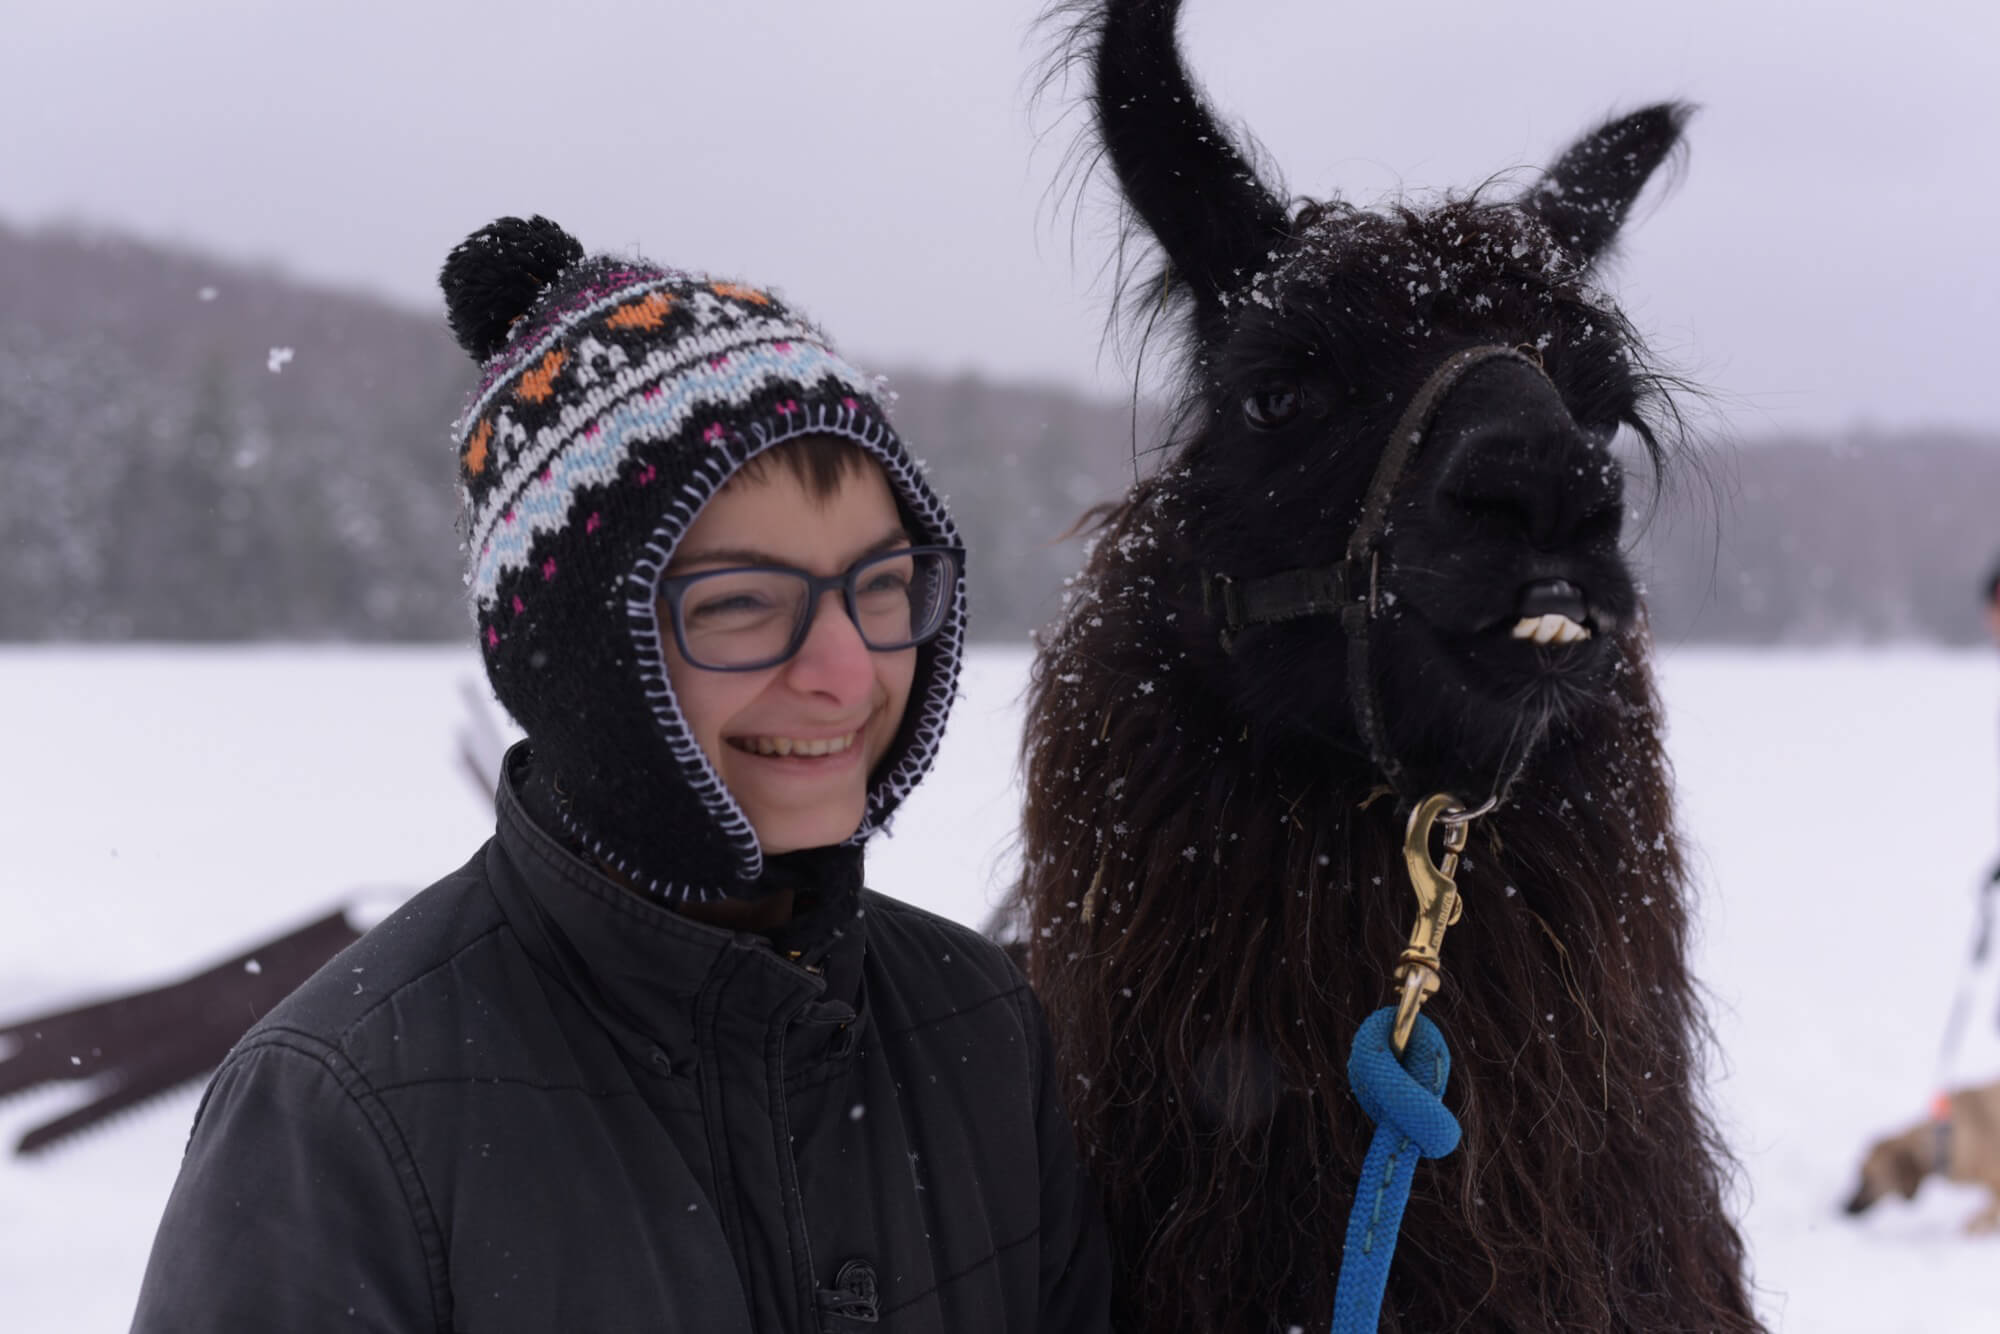 smiling llama and person in the snow